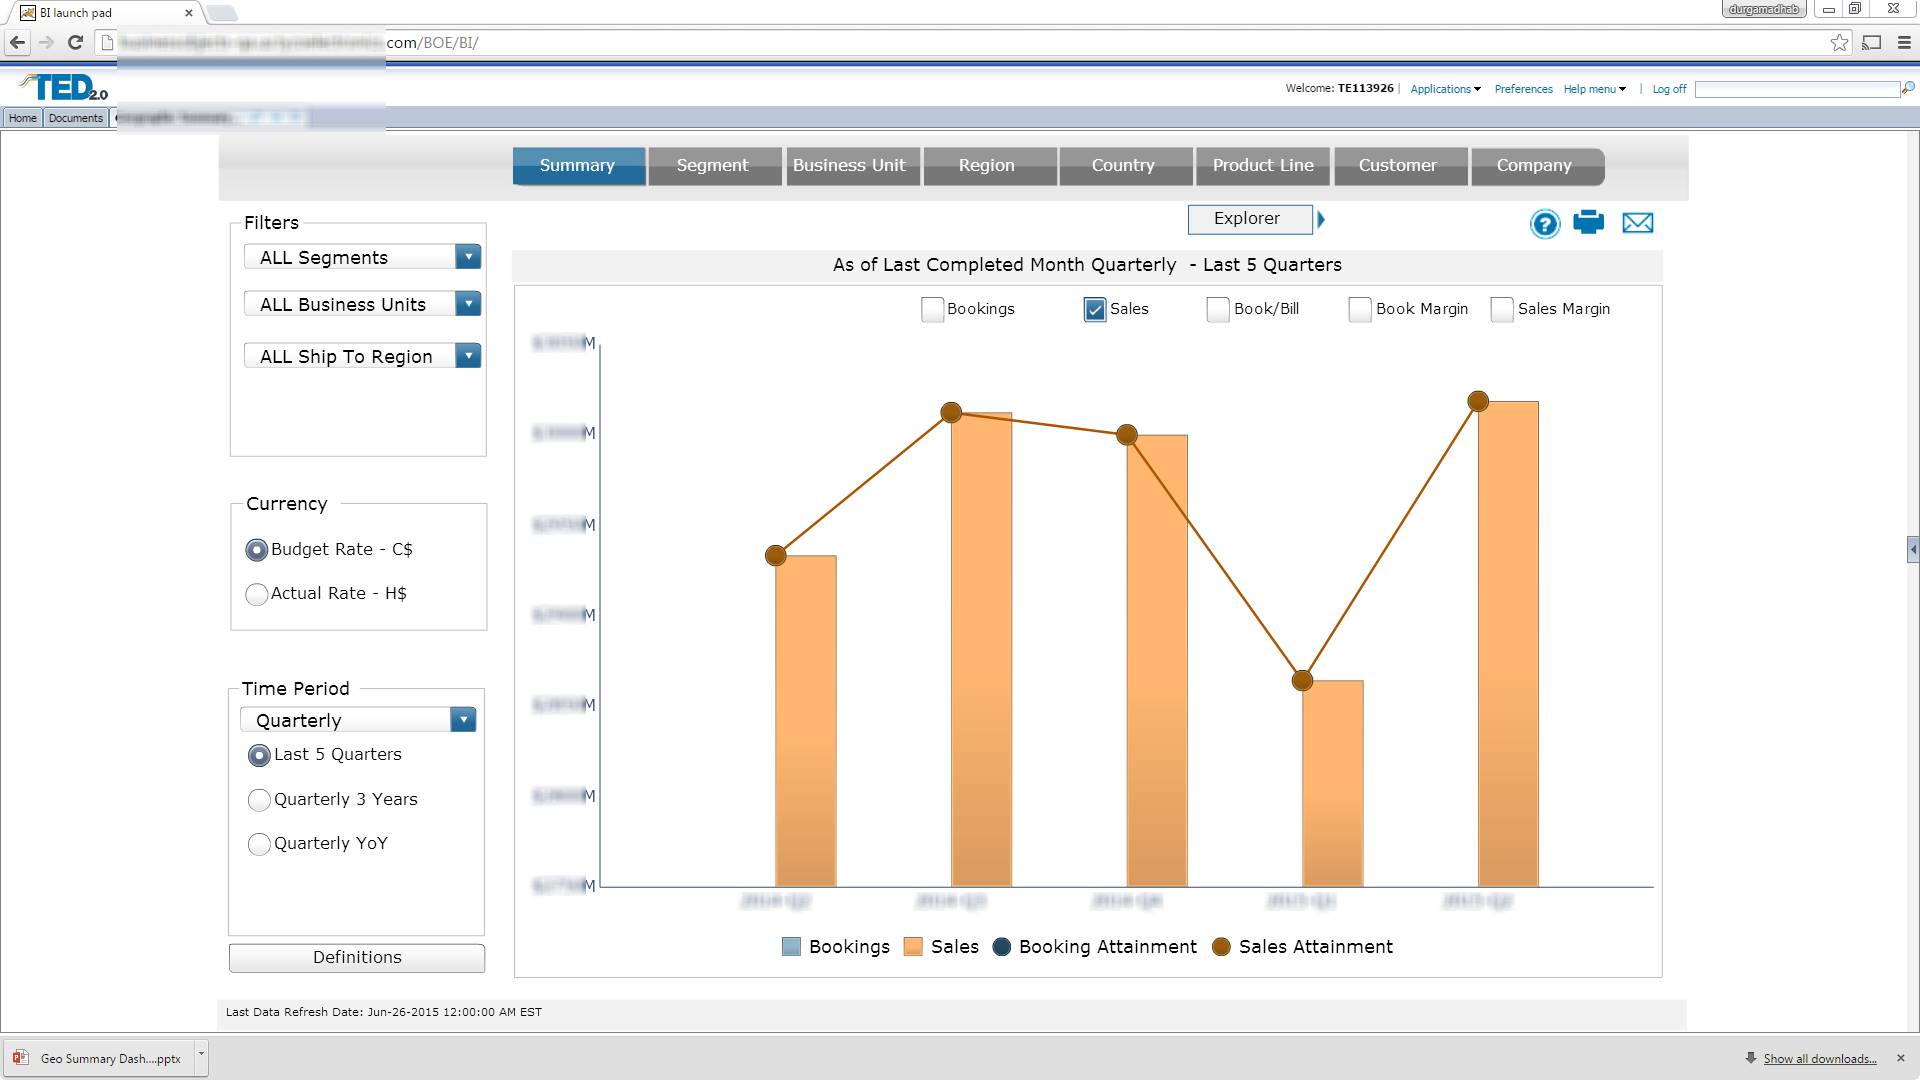 SAP BusinessObjects Dashboards in action